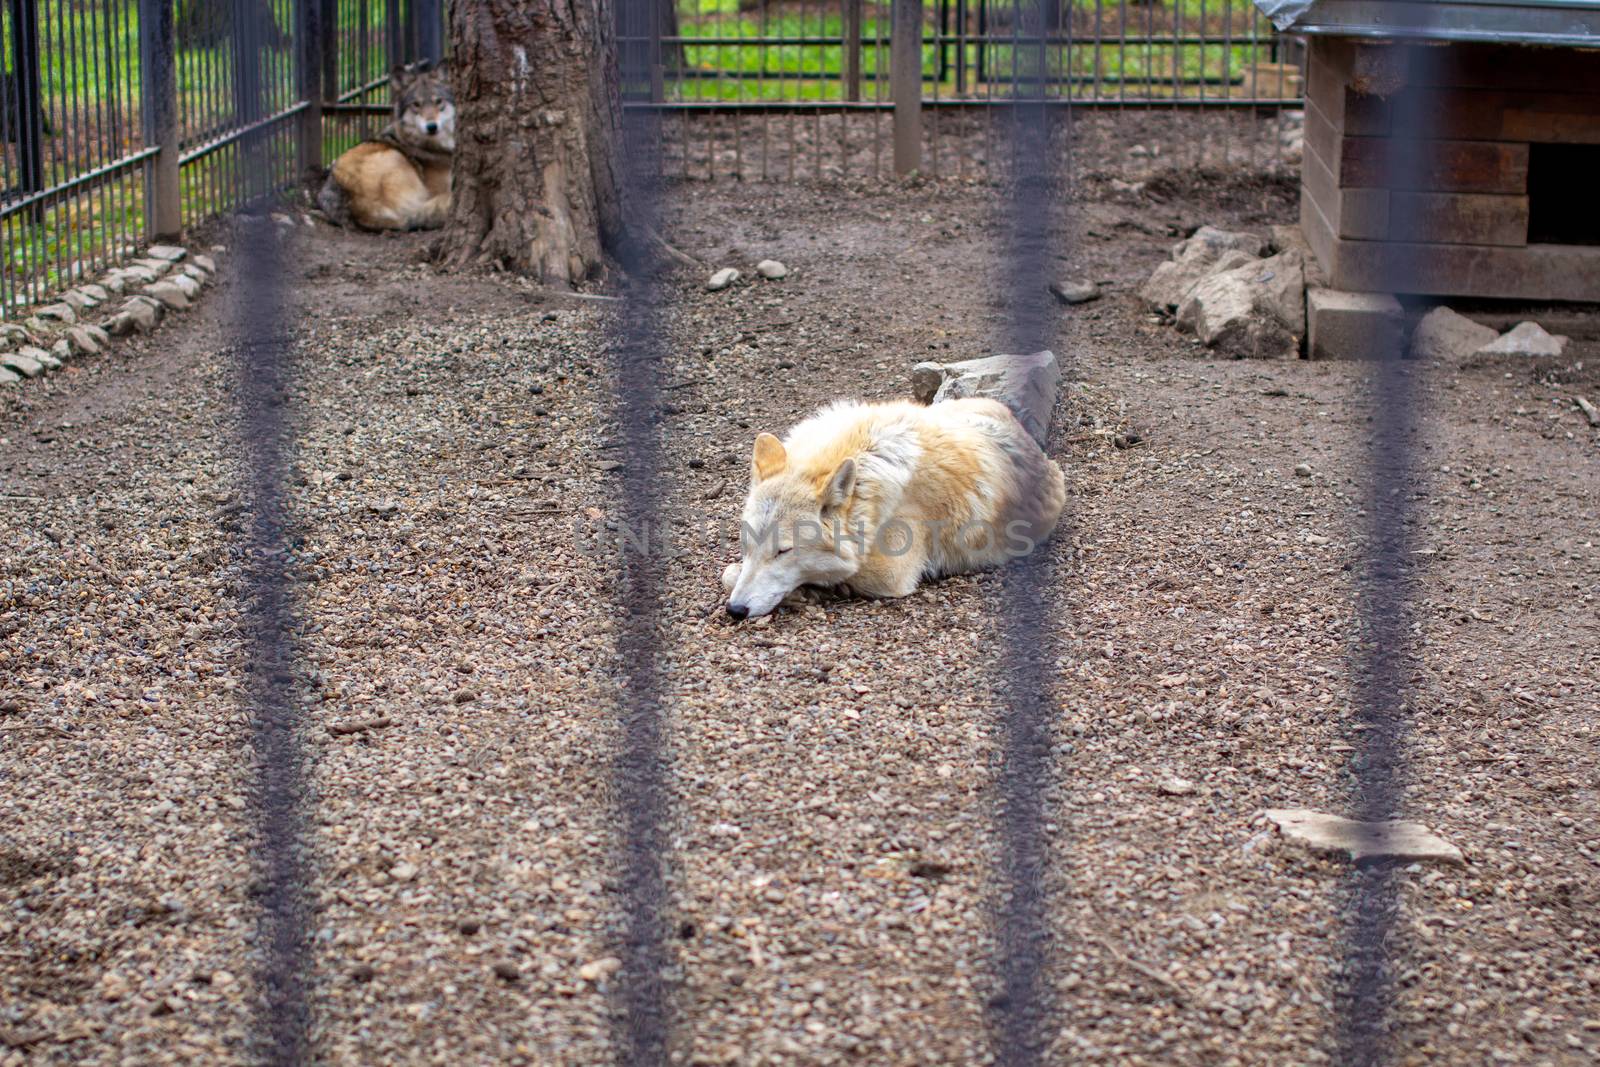 An adult white or polar wolf sleeps in the daytime behind bars. A wolf in a large cage with bars.